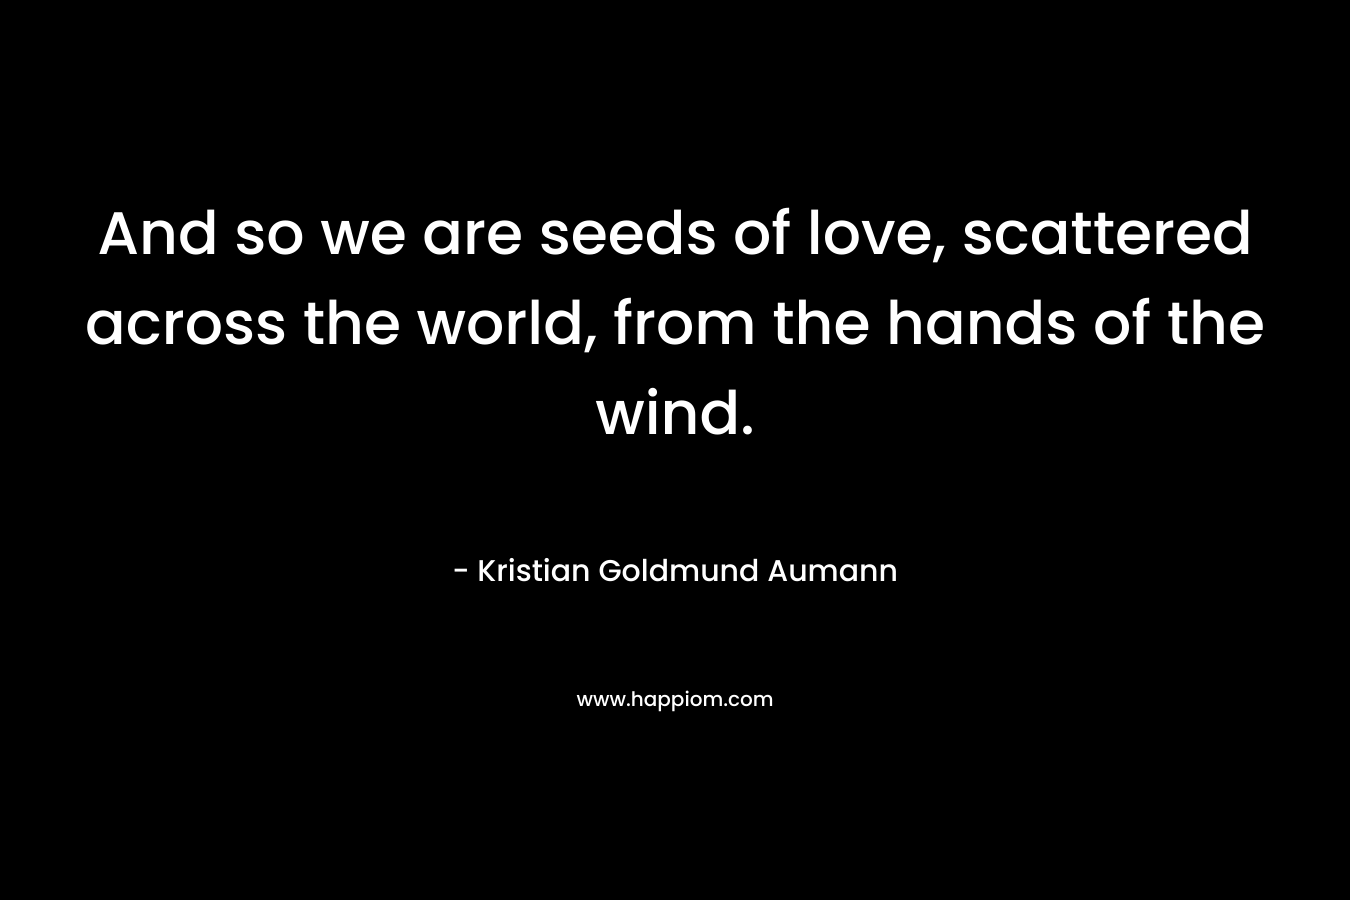 And so we are seeds of love, scattered across the world, from the hands of the wind. – Kristian Goldmund Aumann